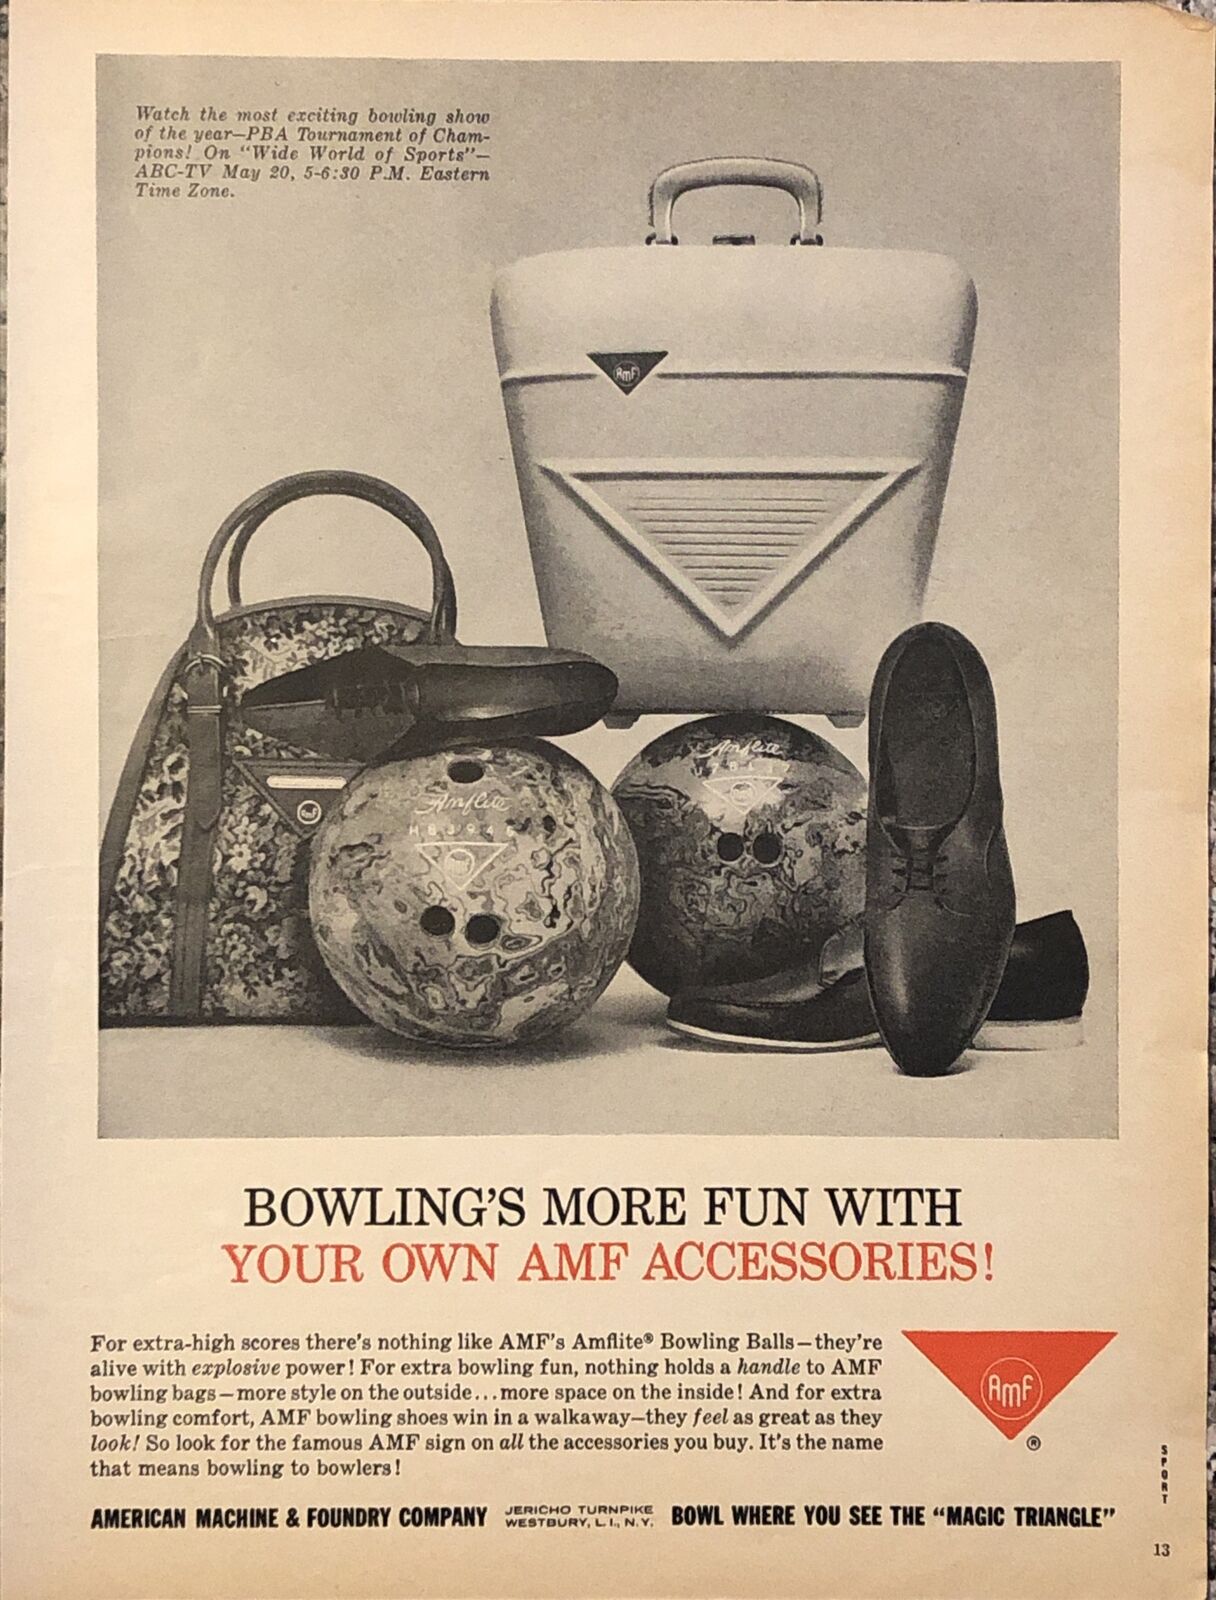 1962 AMF Bowling Accessories VTG 1960s 60s PRINT AD American Machine & Foundry